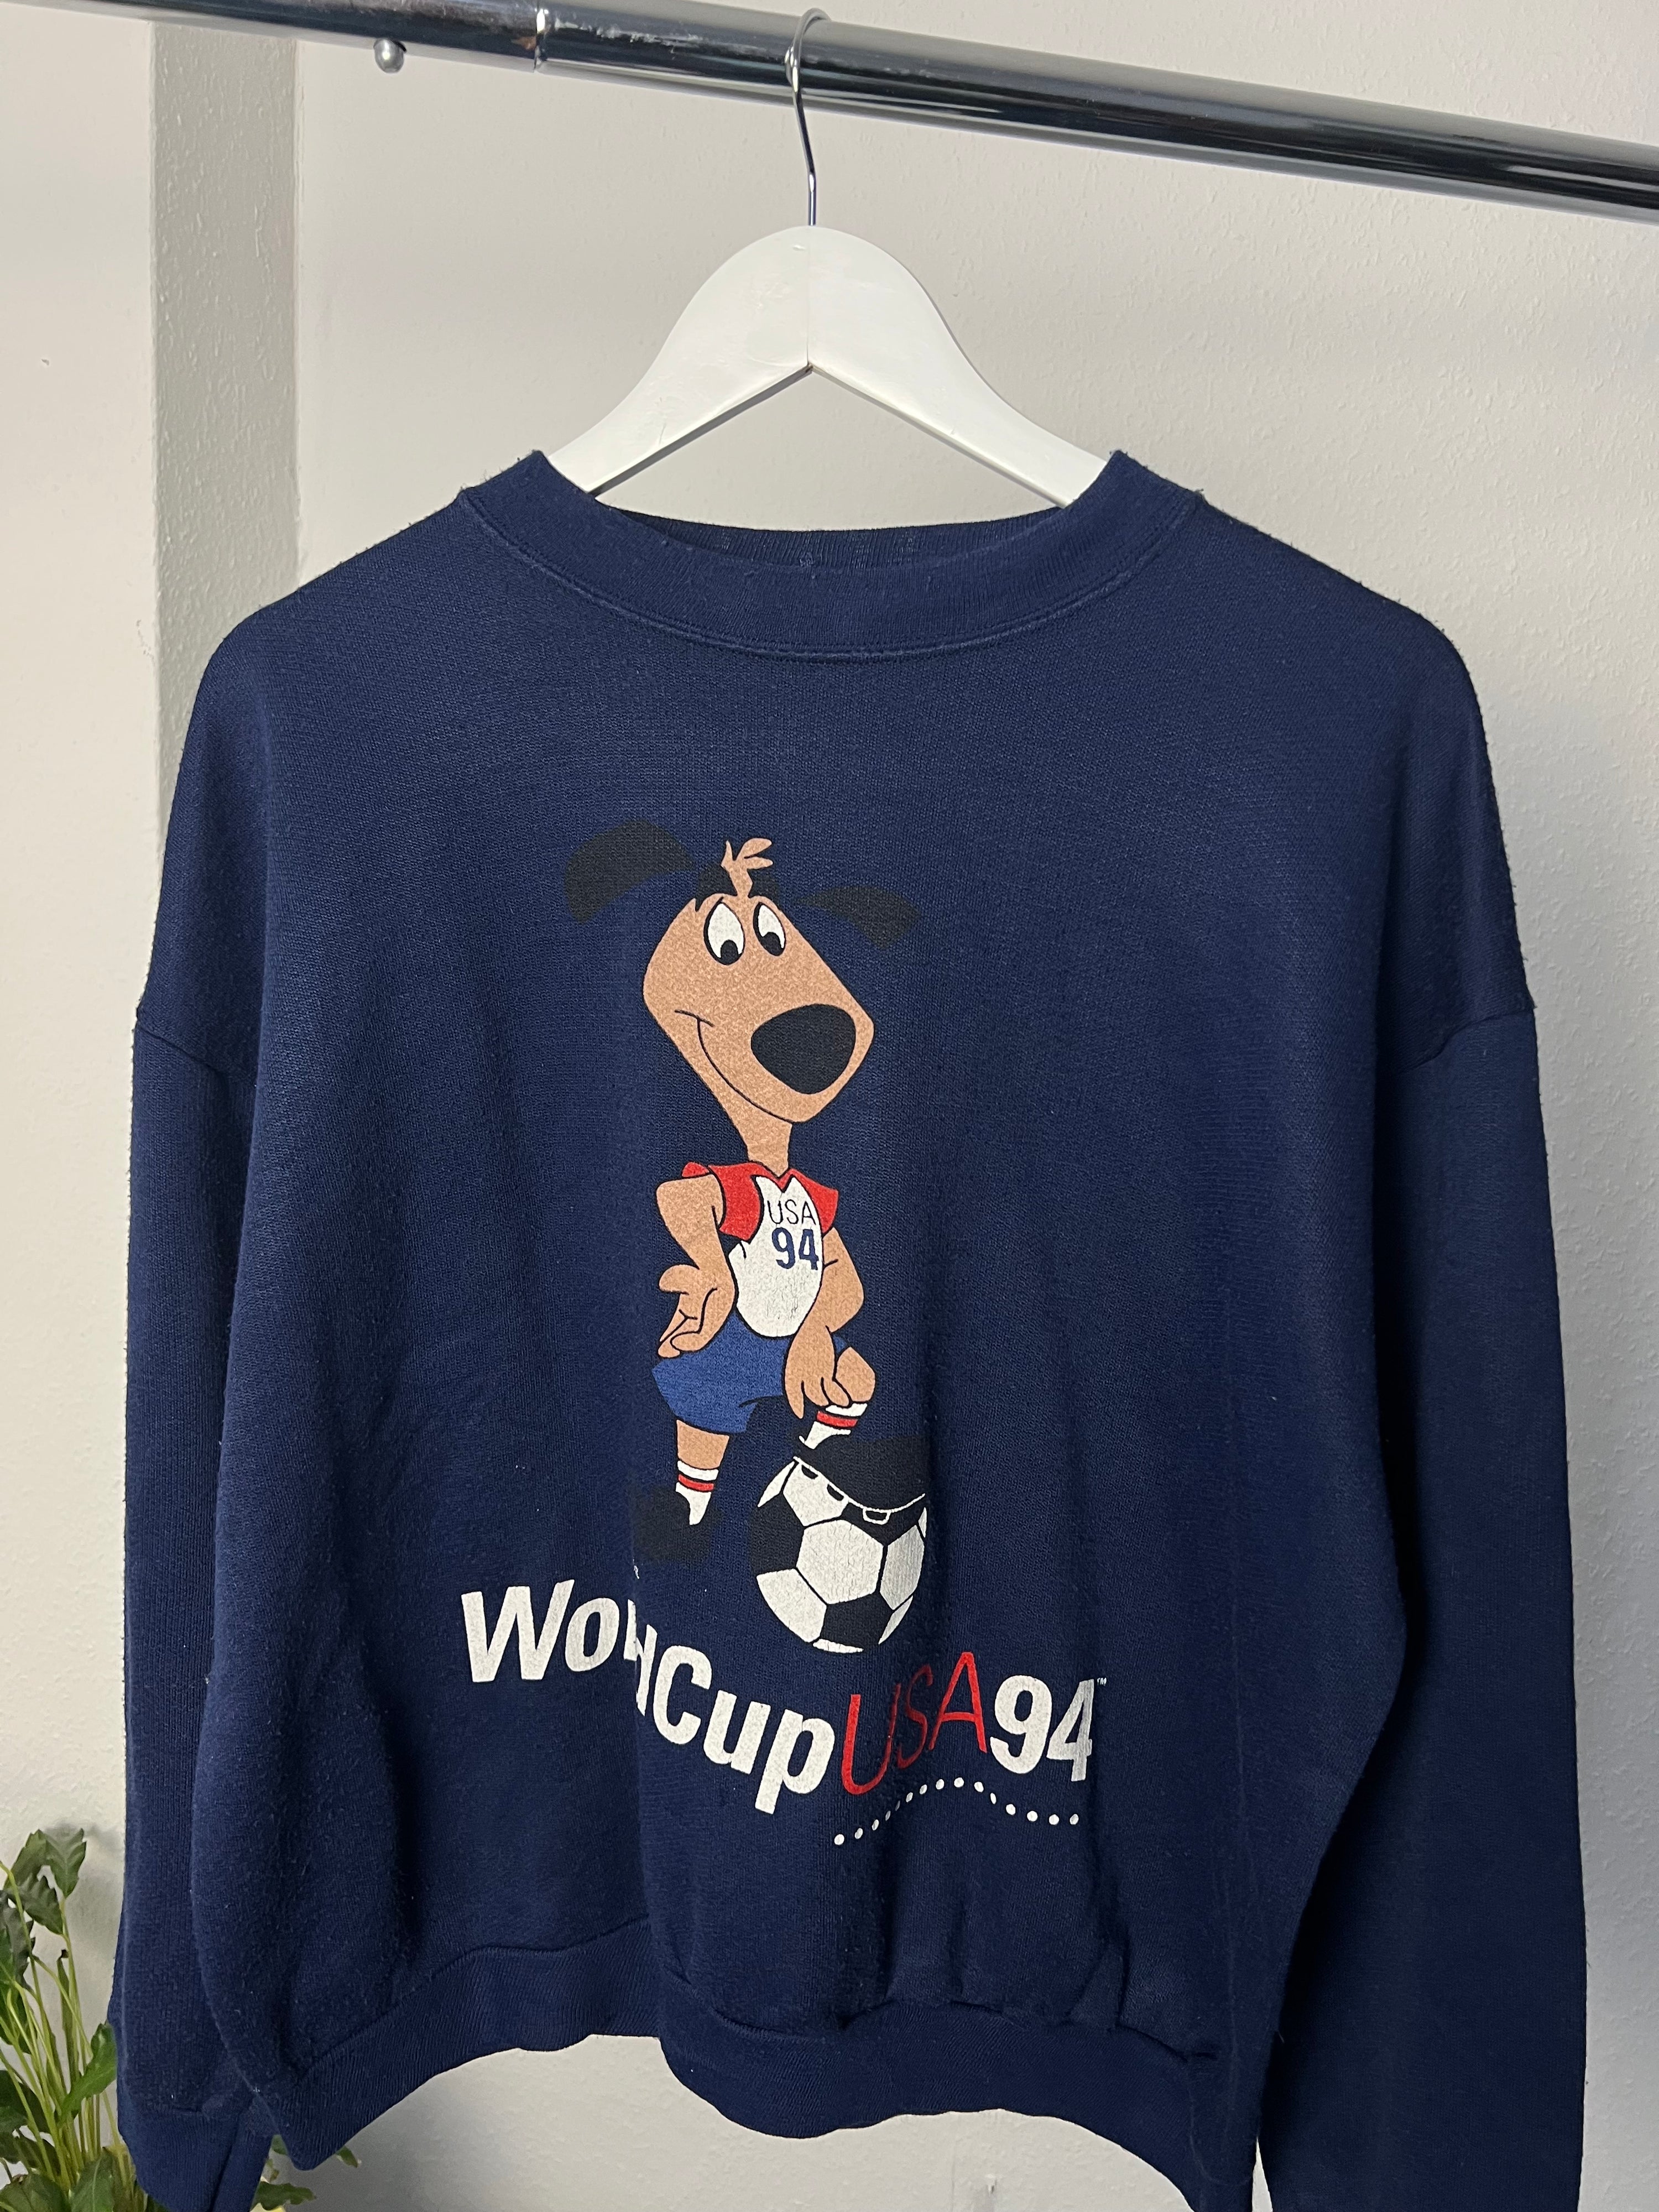 Vintage 1994 Football Soccer World Cup USA Sweater (S)